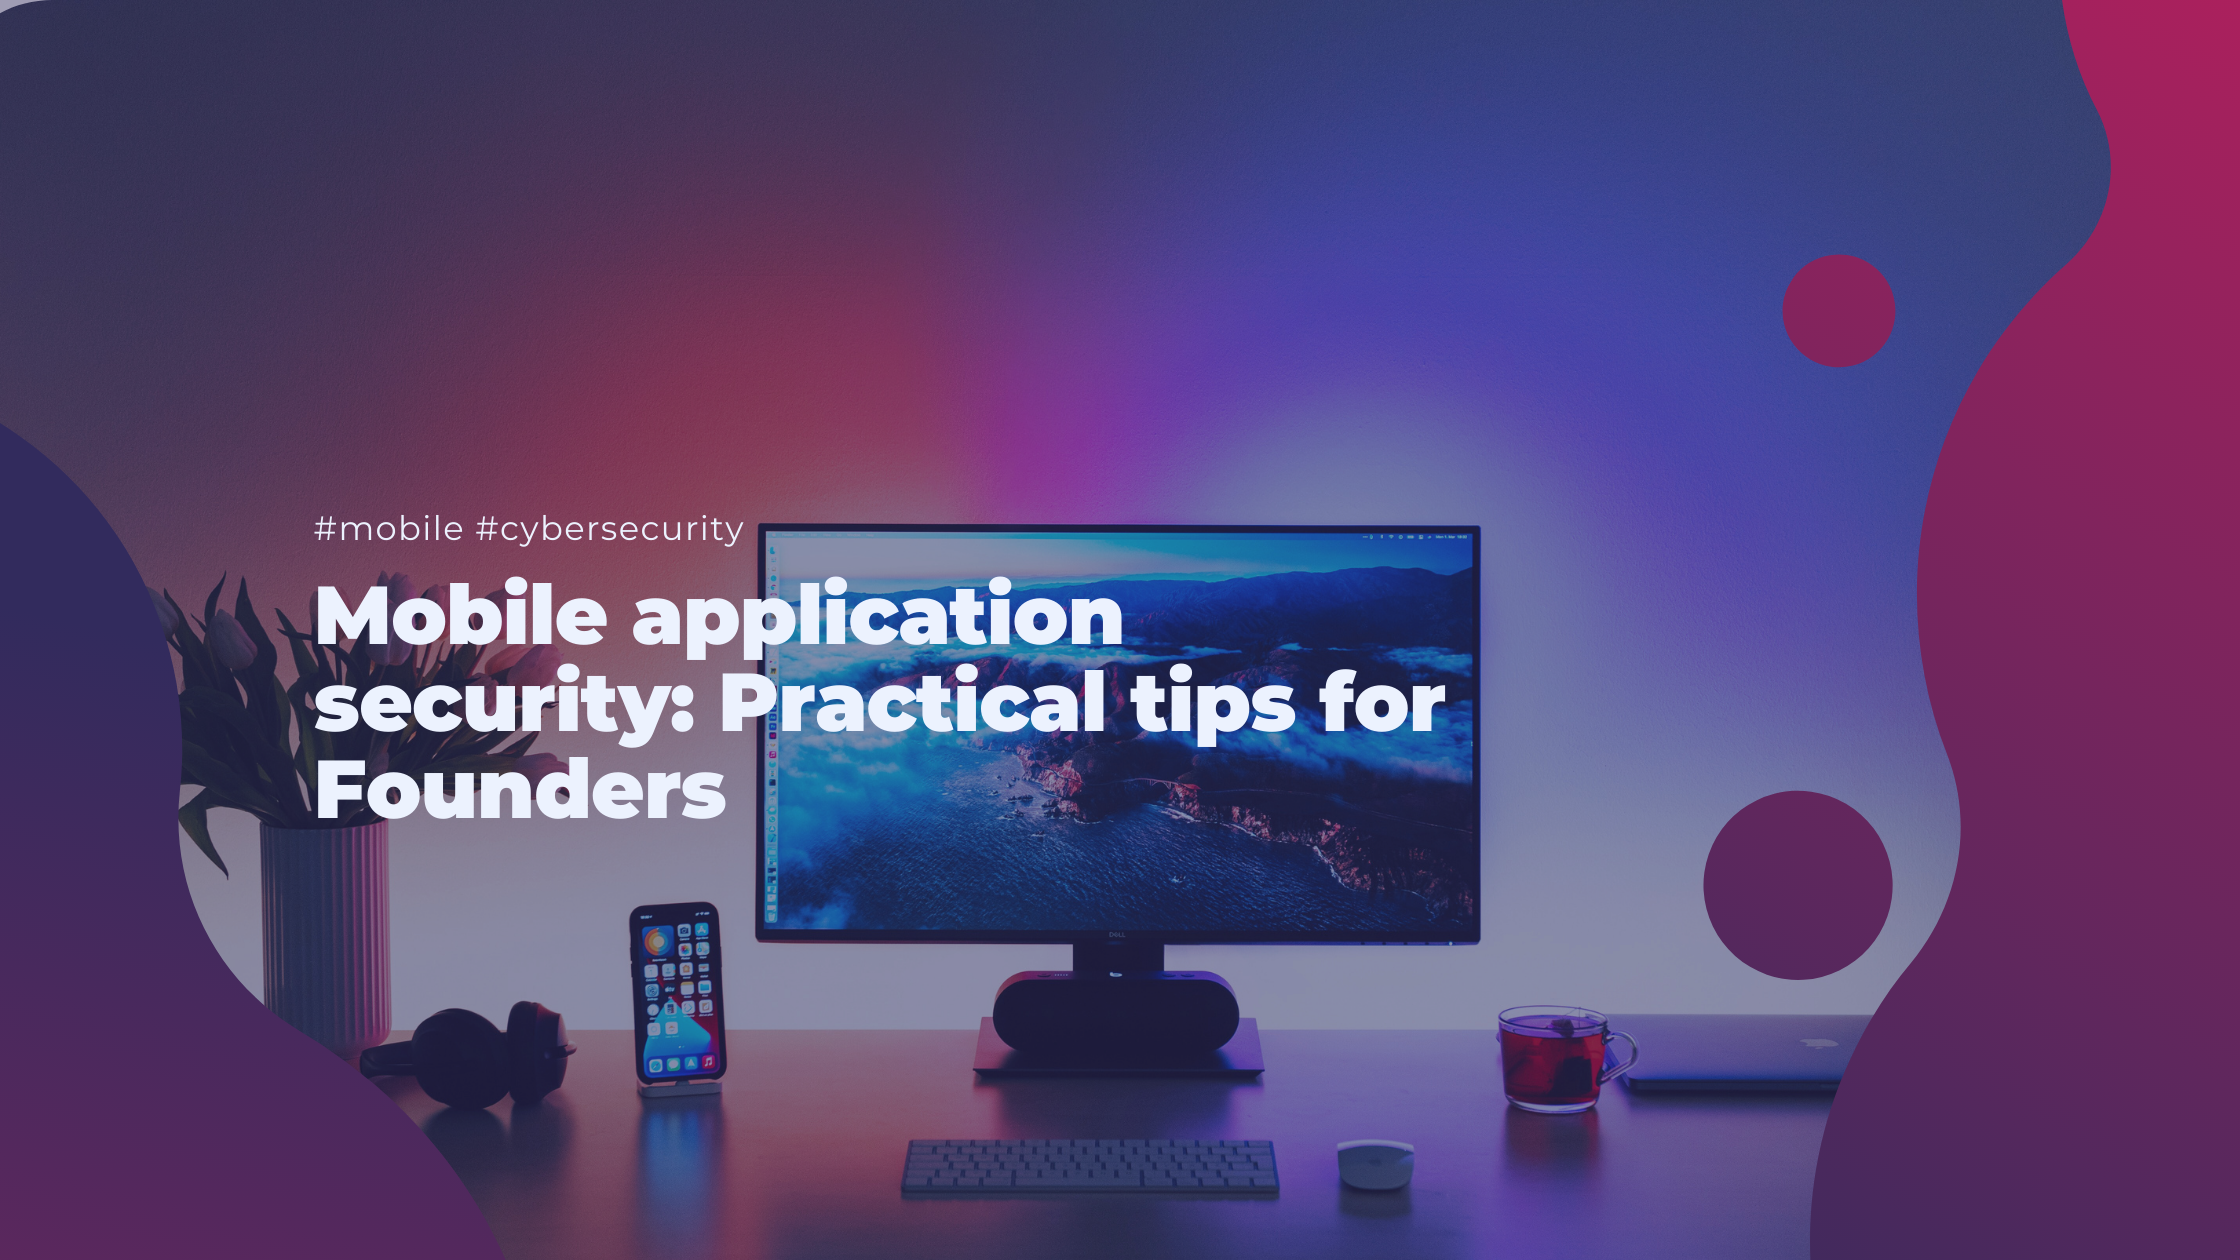 Mobile application security: Practical tips for Founders